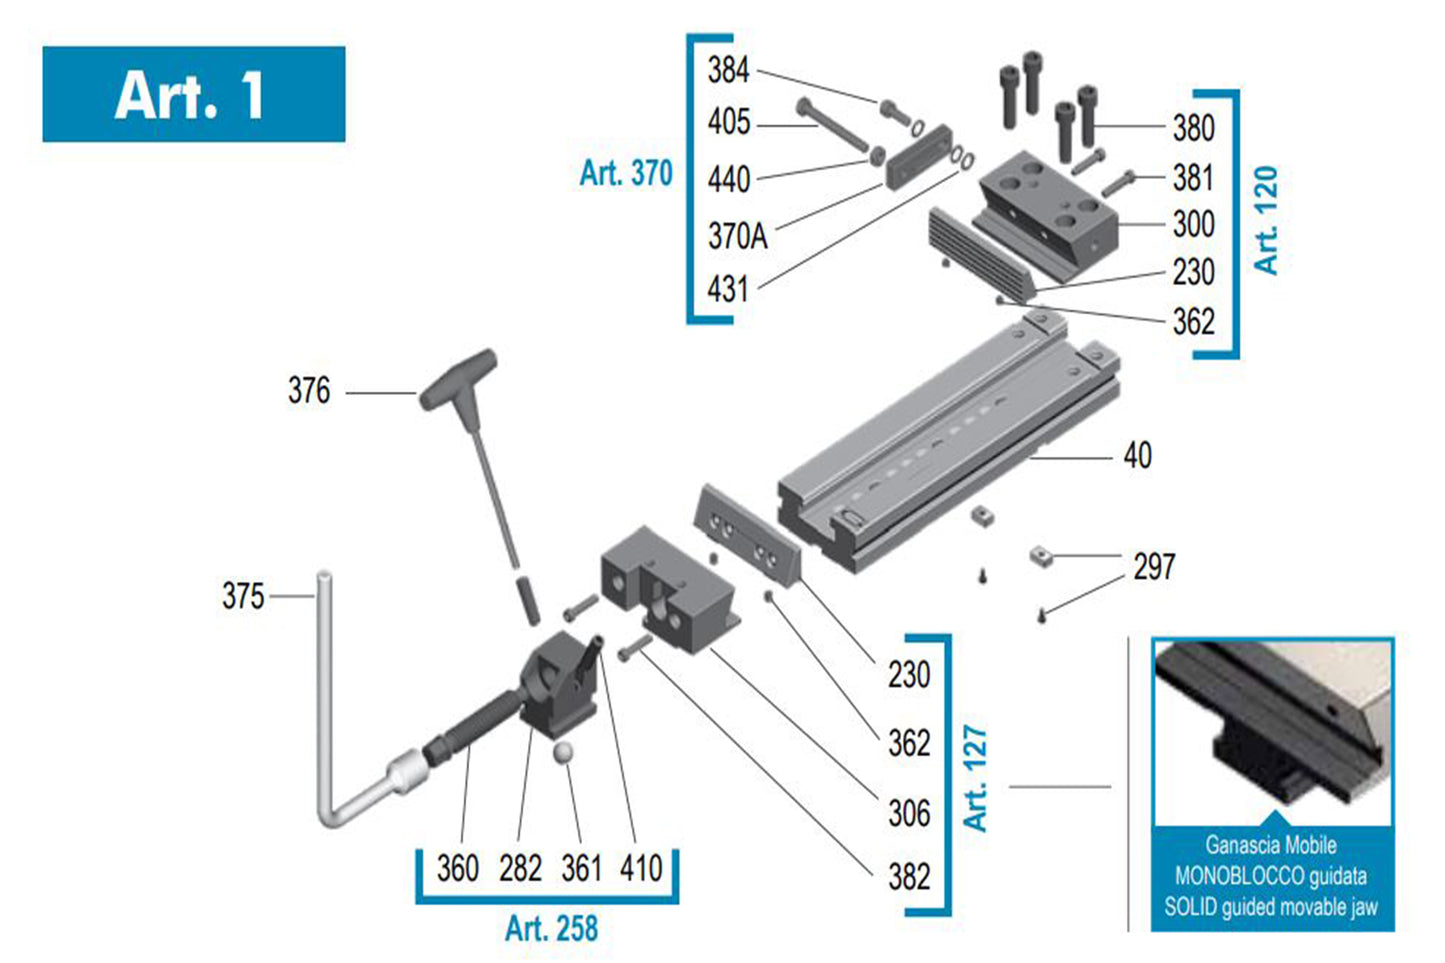 Gerardi Standard Precision Modular Vice with Solid Guided Movable Jaw (Width = 200mm, Opening = 200mm)